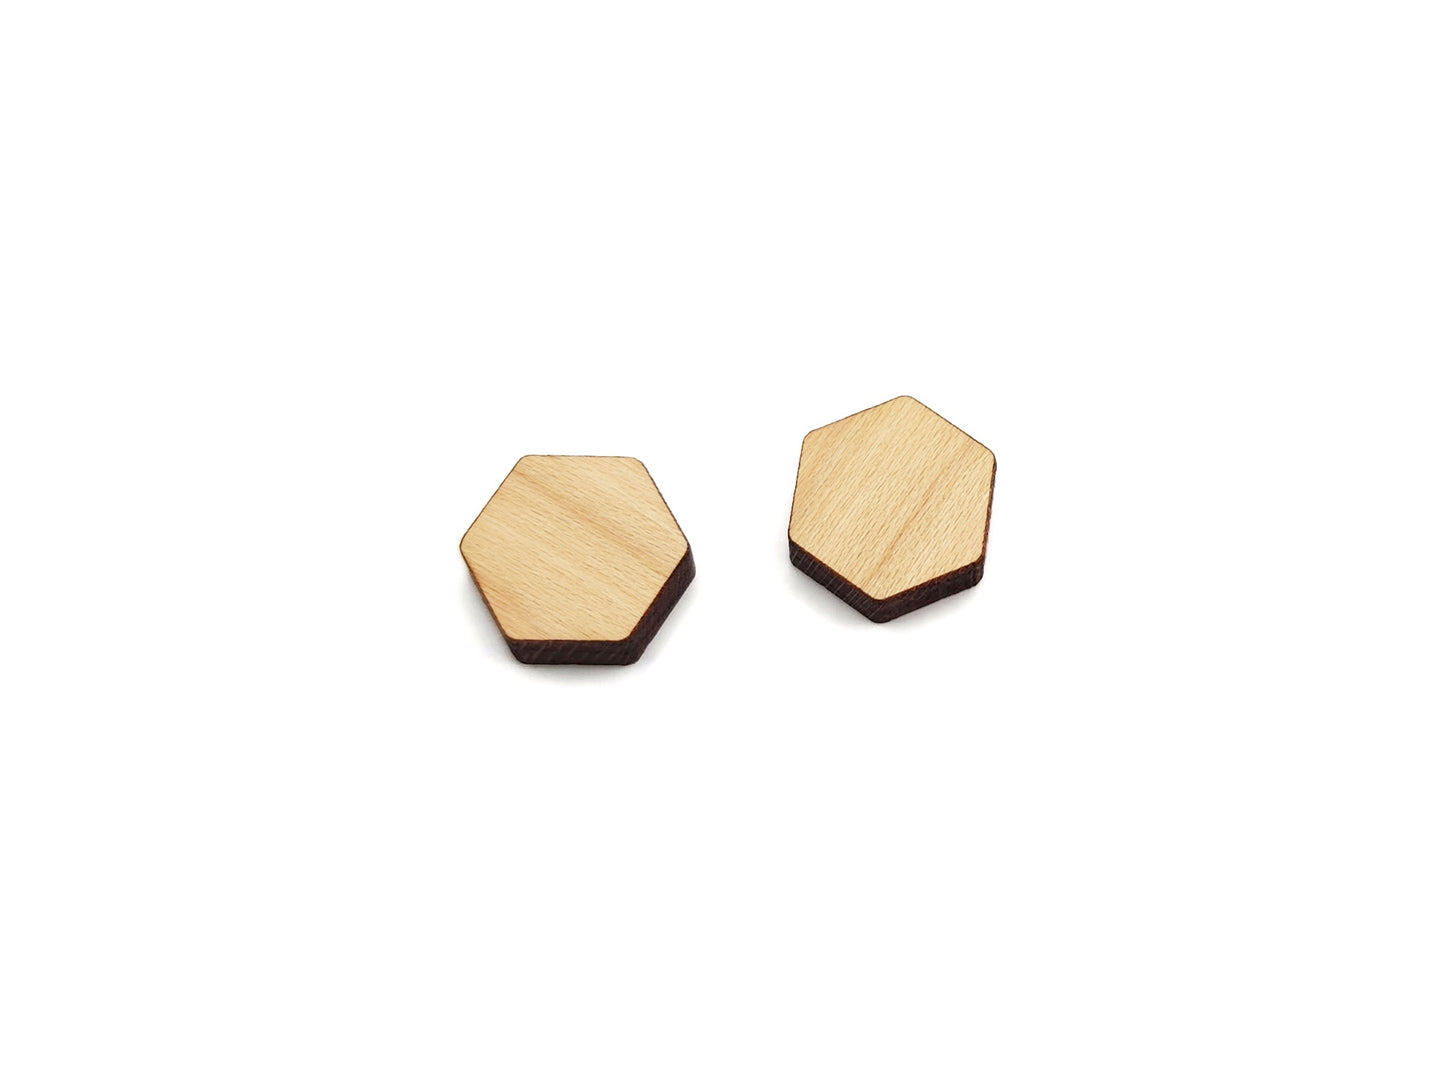 A pair of wood and acrylic cabochon earring blanks cut in the shape of a hexagon